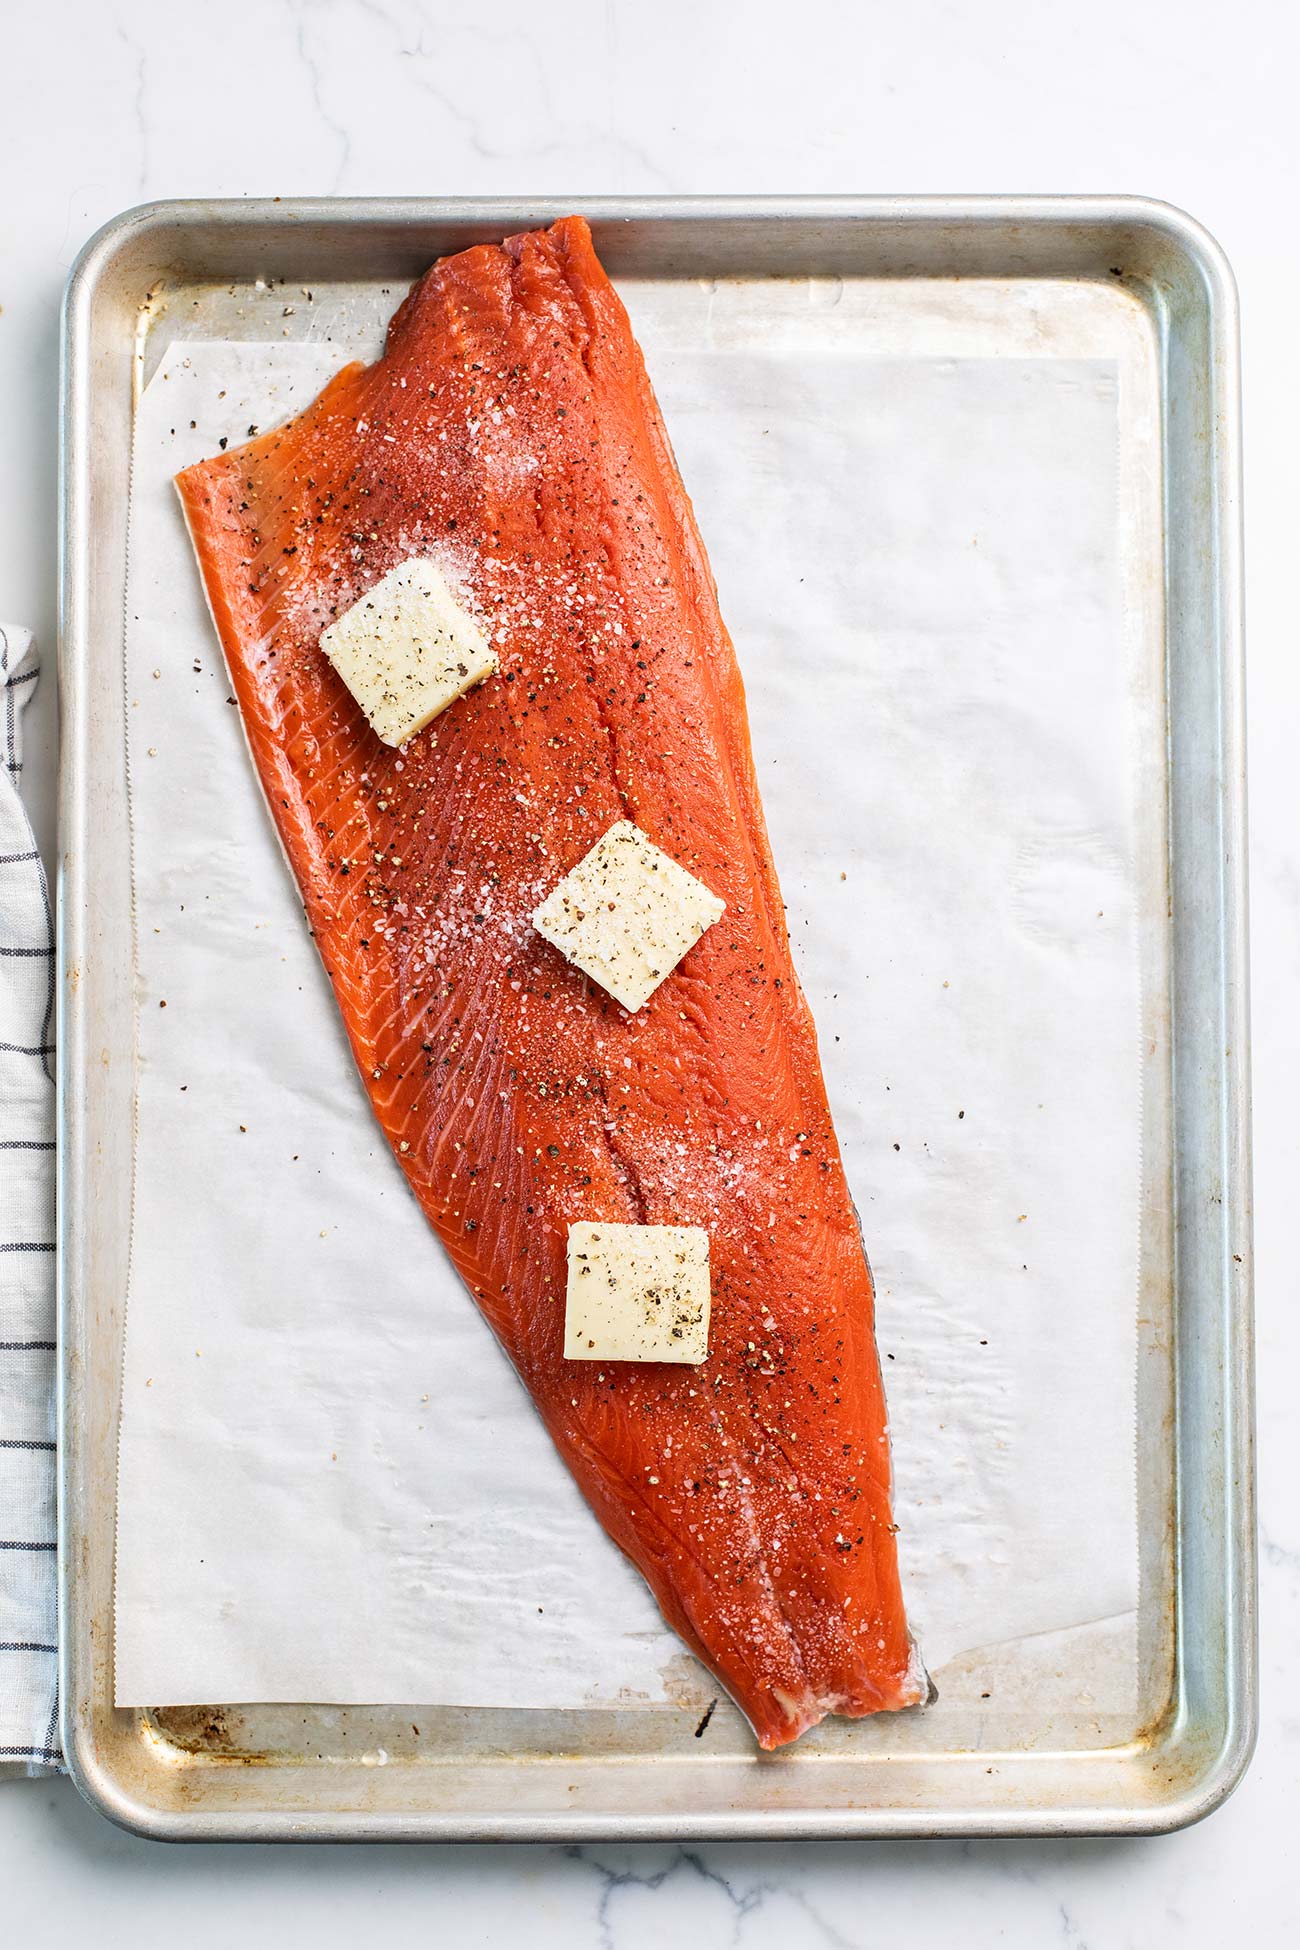 Step 2 shows adding the salmon to a sheet pan and seasoning it.